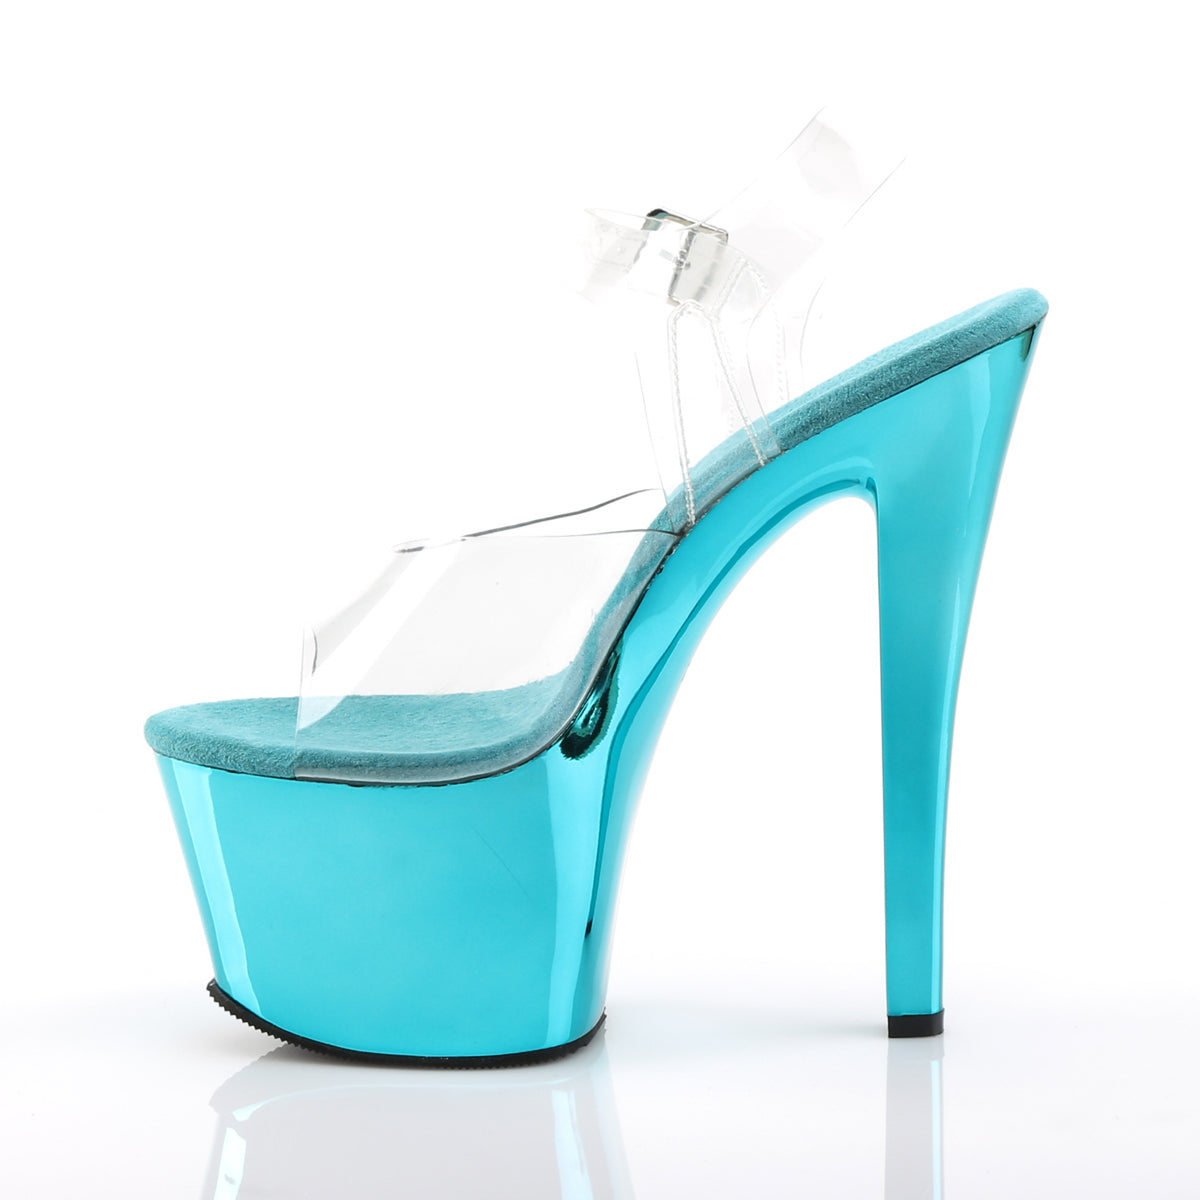 SKY-308 7" Clear and Turquoise Chrome Pole Dancer Platforms-Pleaser- Sexy Shoes Pole Dance Heels